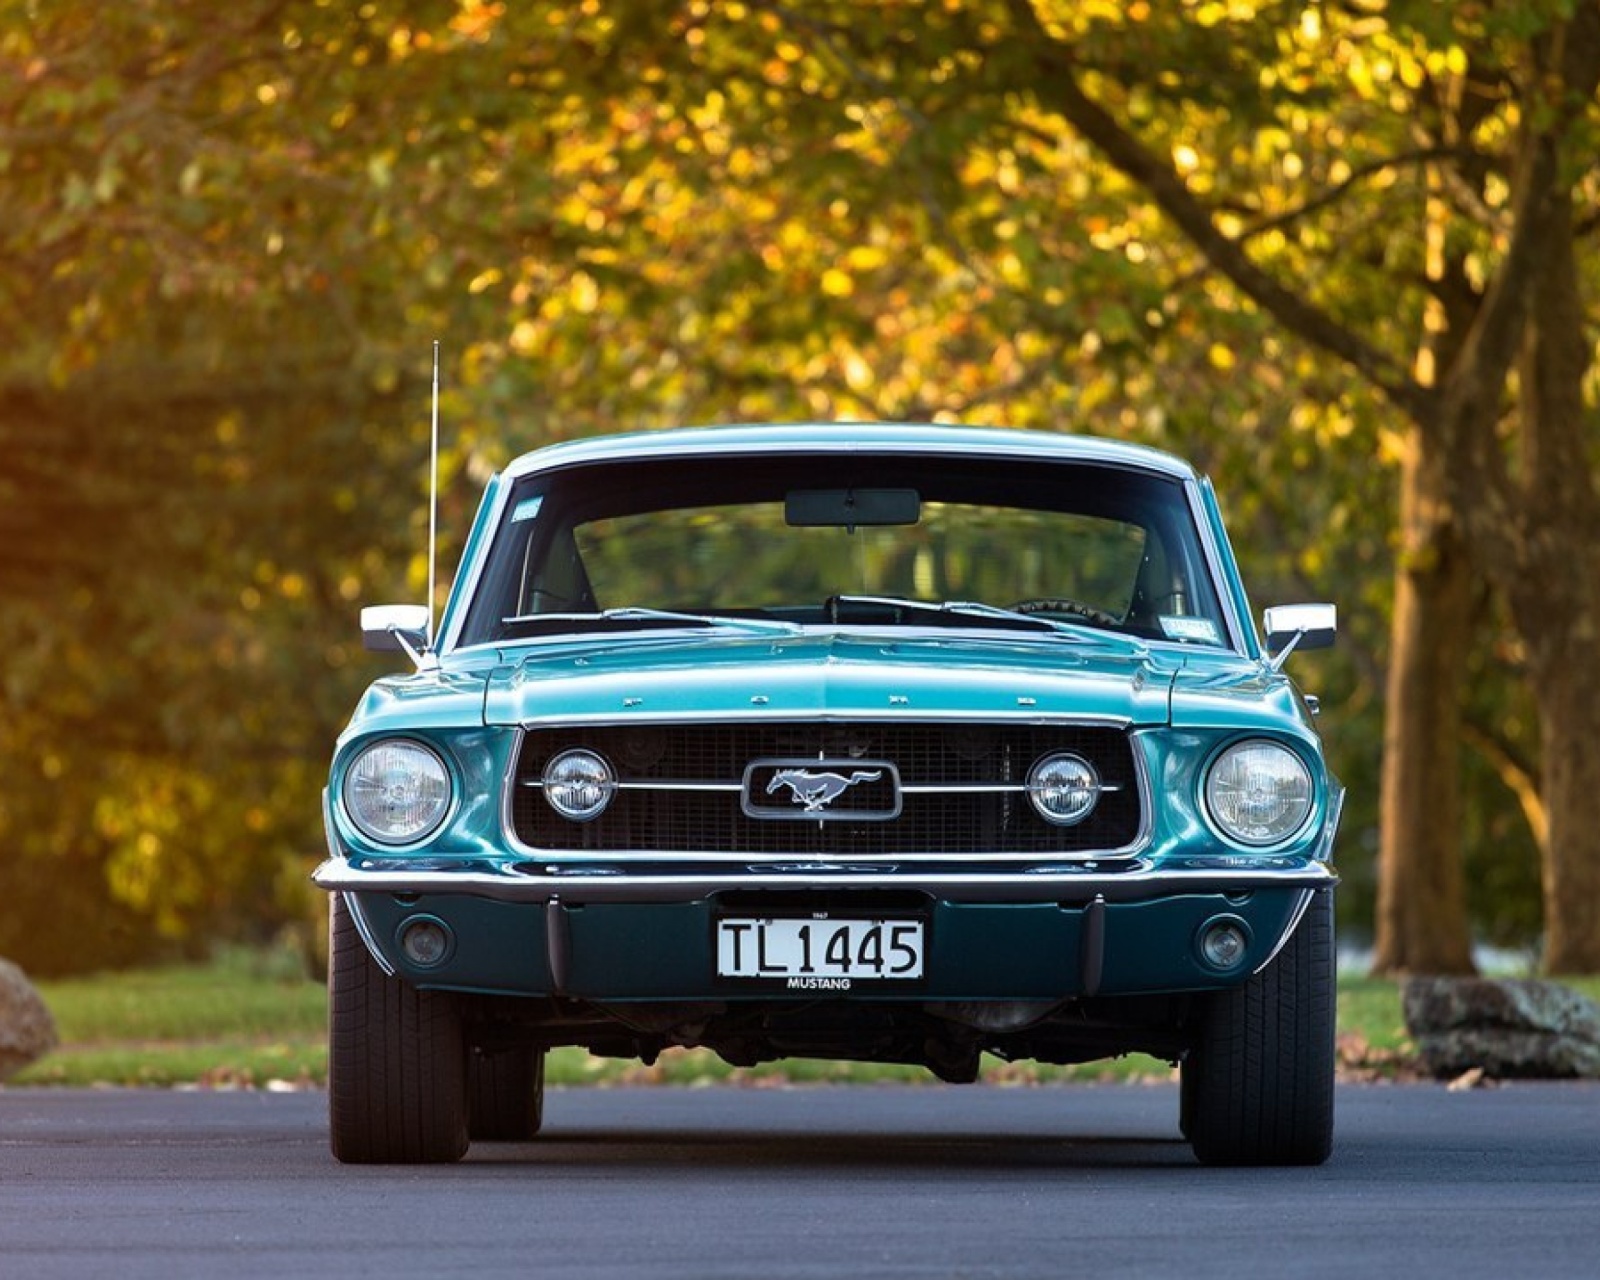 Ford Mustang First Generation wallpaper 1600x1280